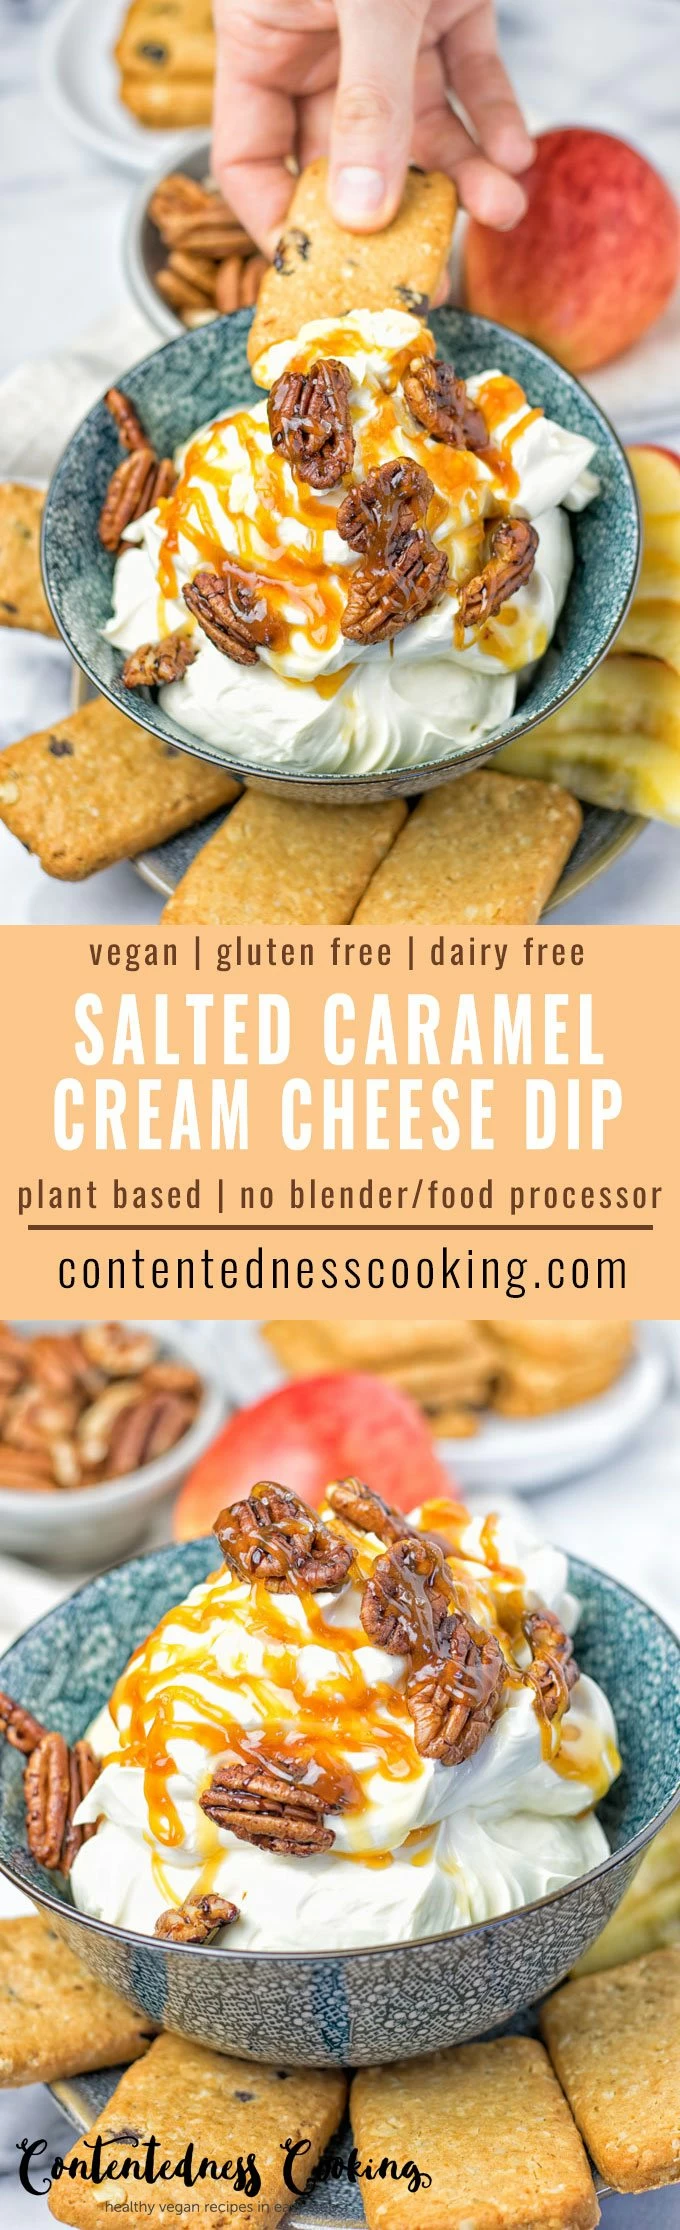 Collage of two pictures of the Salted Caramel Cream Cheese Dip with recipe title text.